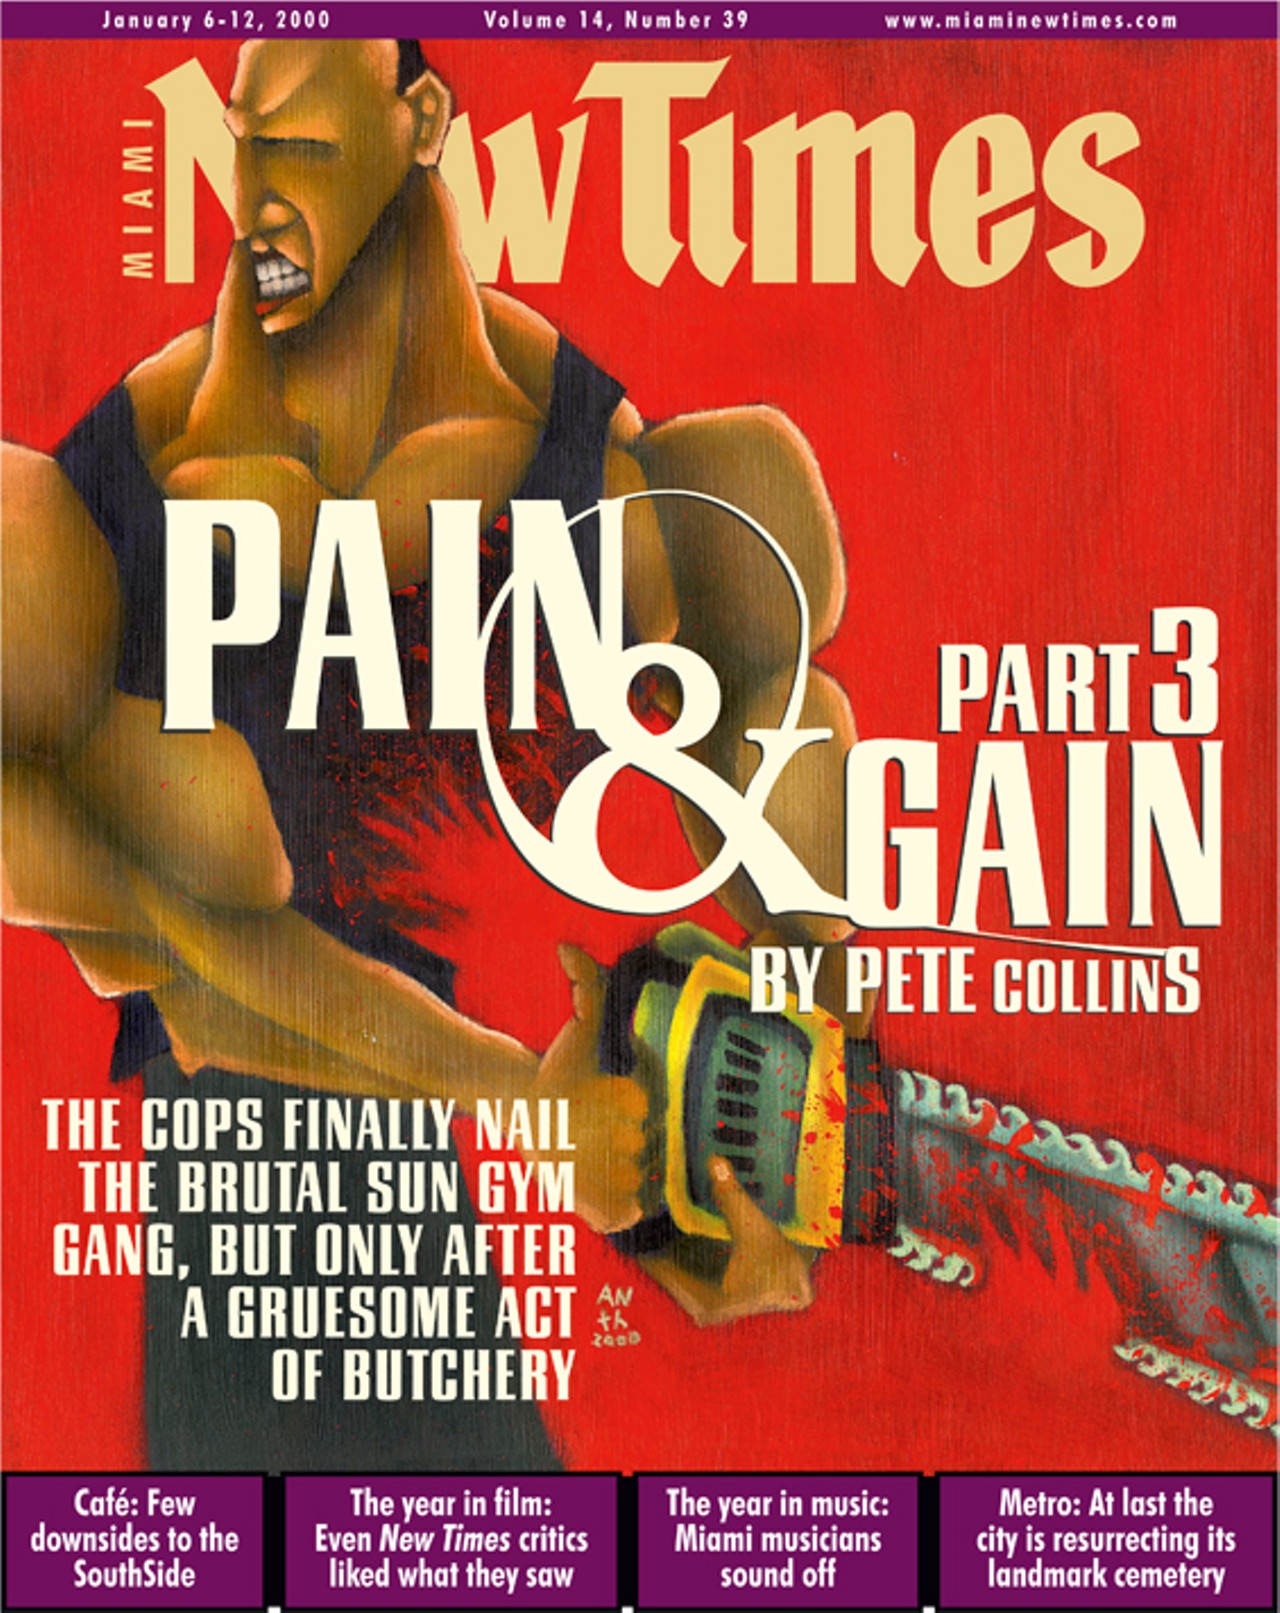 The cover of "Pain & Gain, Part 3", January 6, 2000.